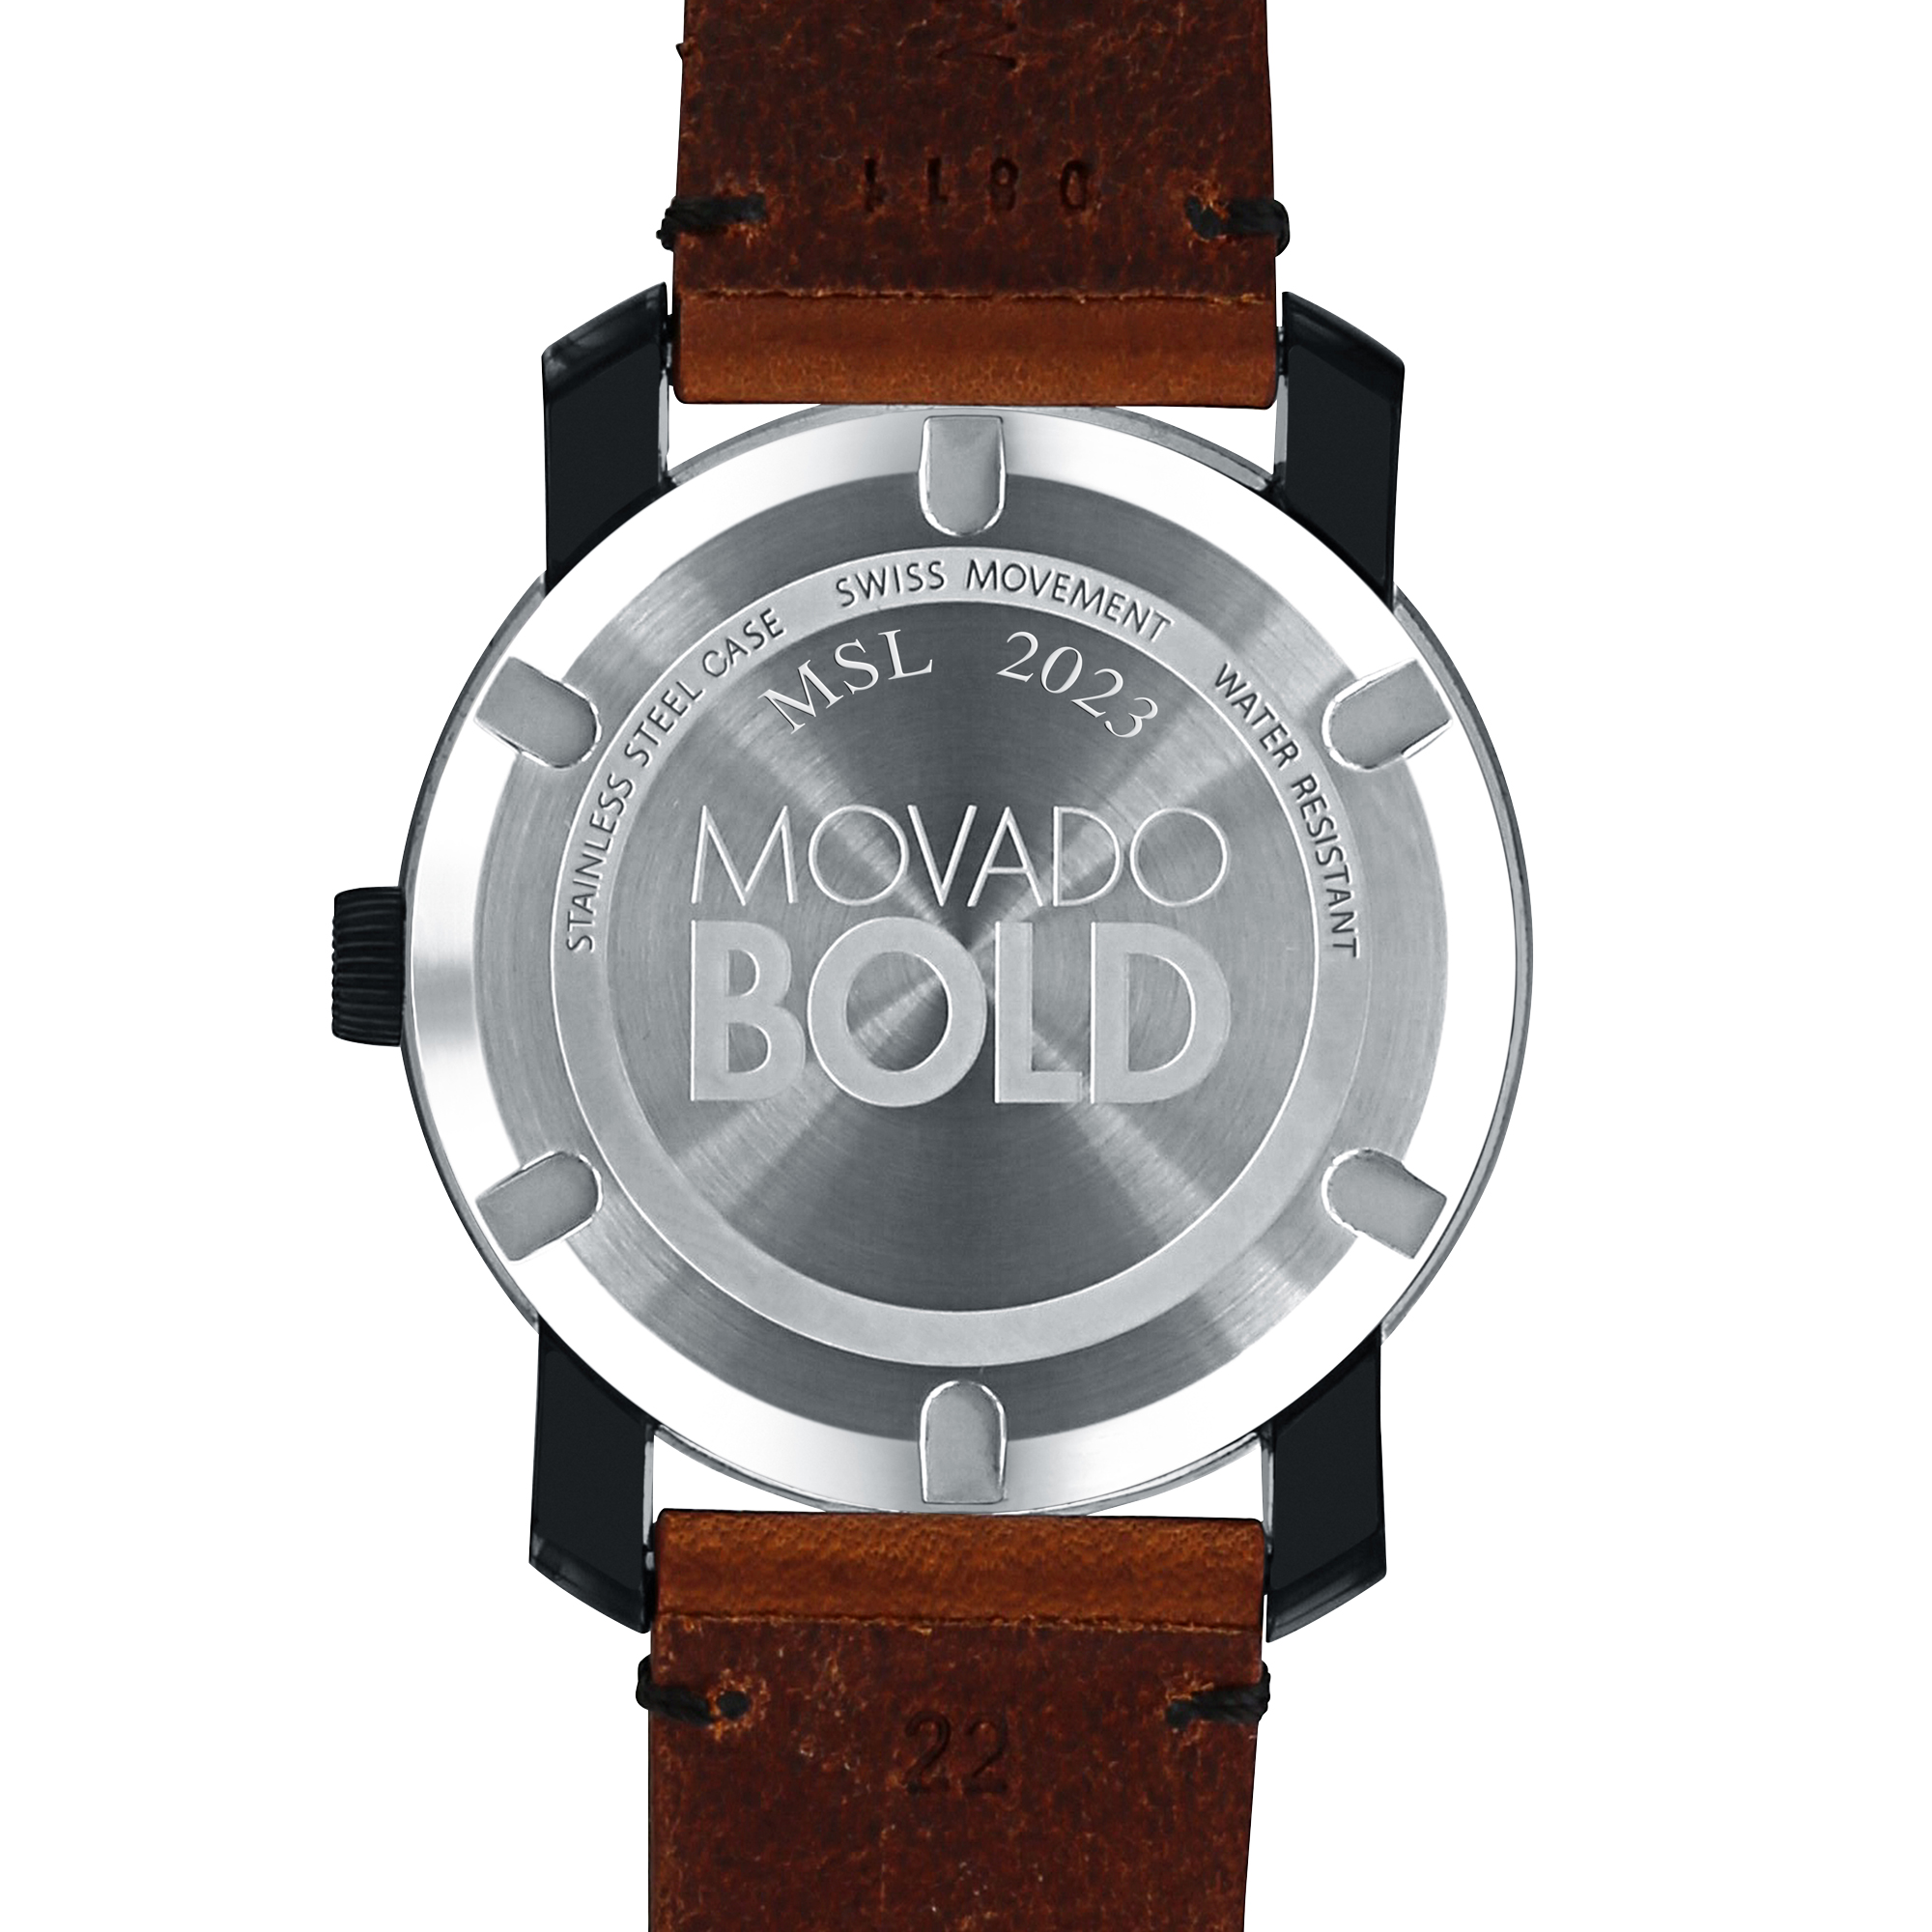 University of Pennsylvania Men's Movado BOLD with Brown Leather Strap - Image 3